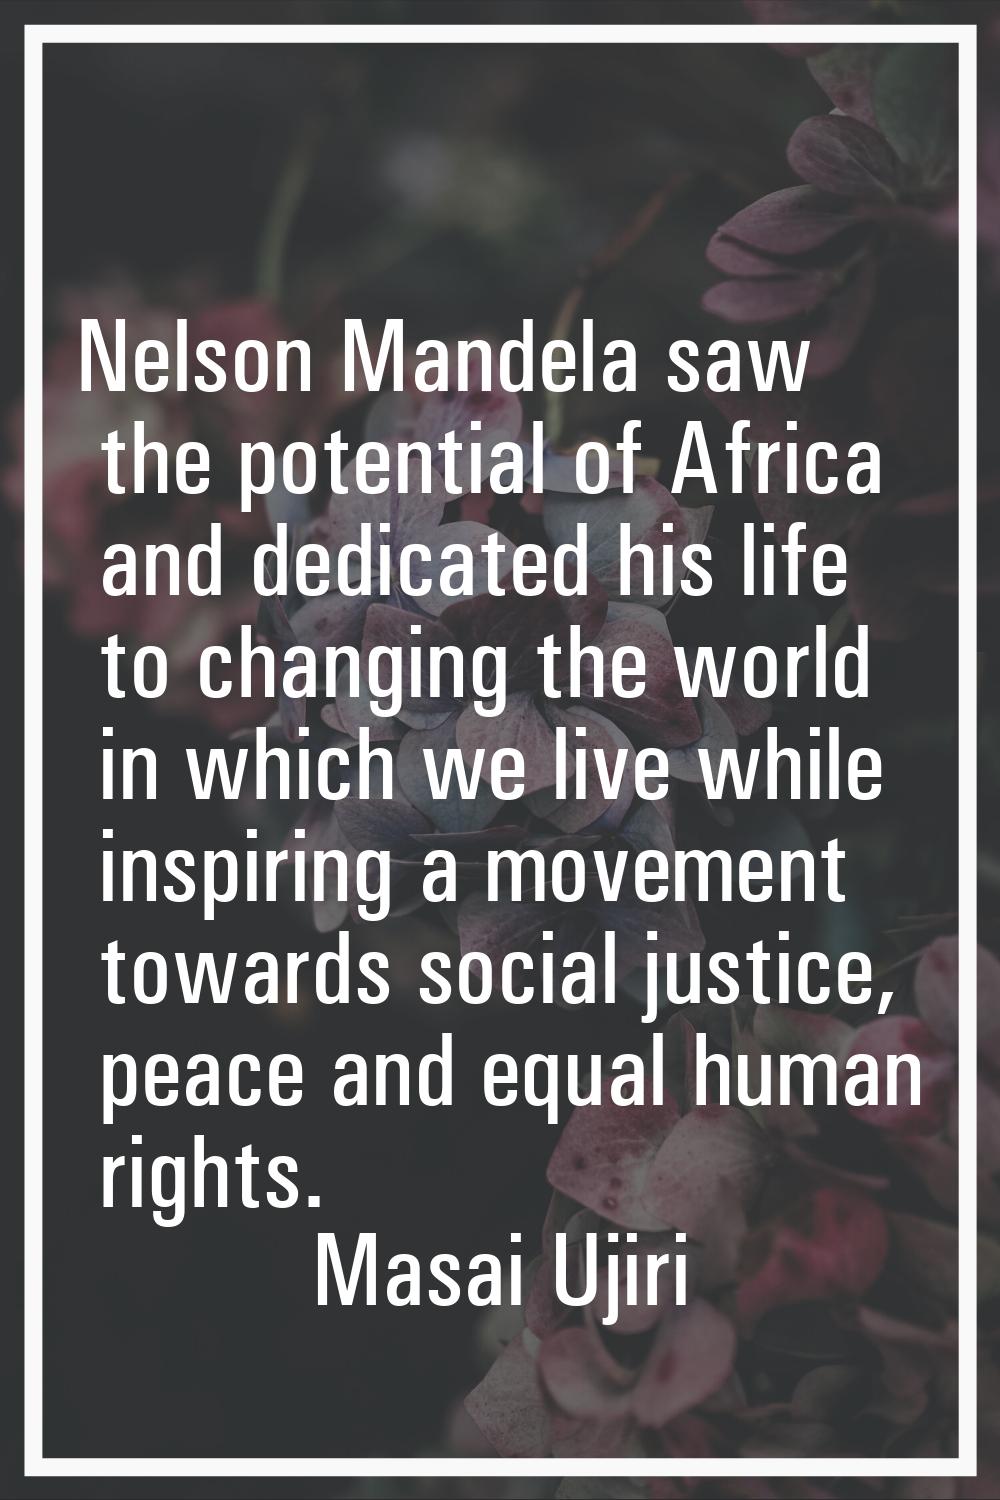 Nelson Mandela saw the potential of Africa and dedicated his life to changing the world in which we